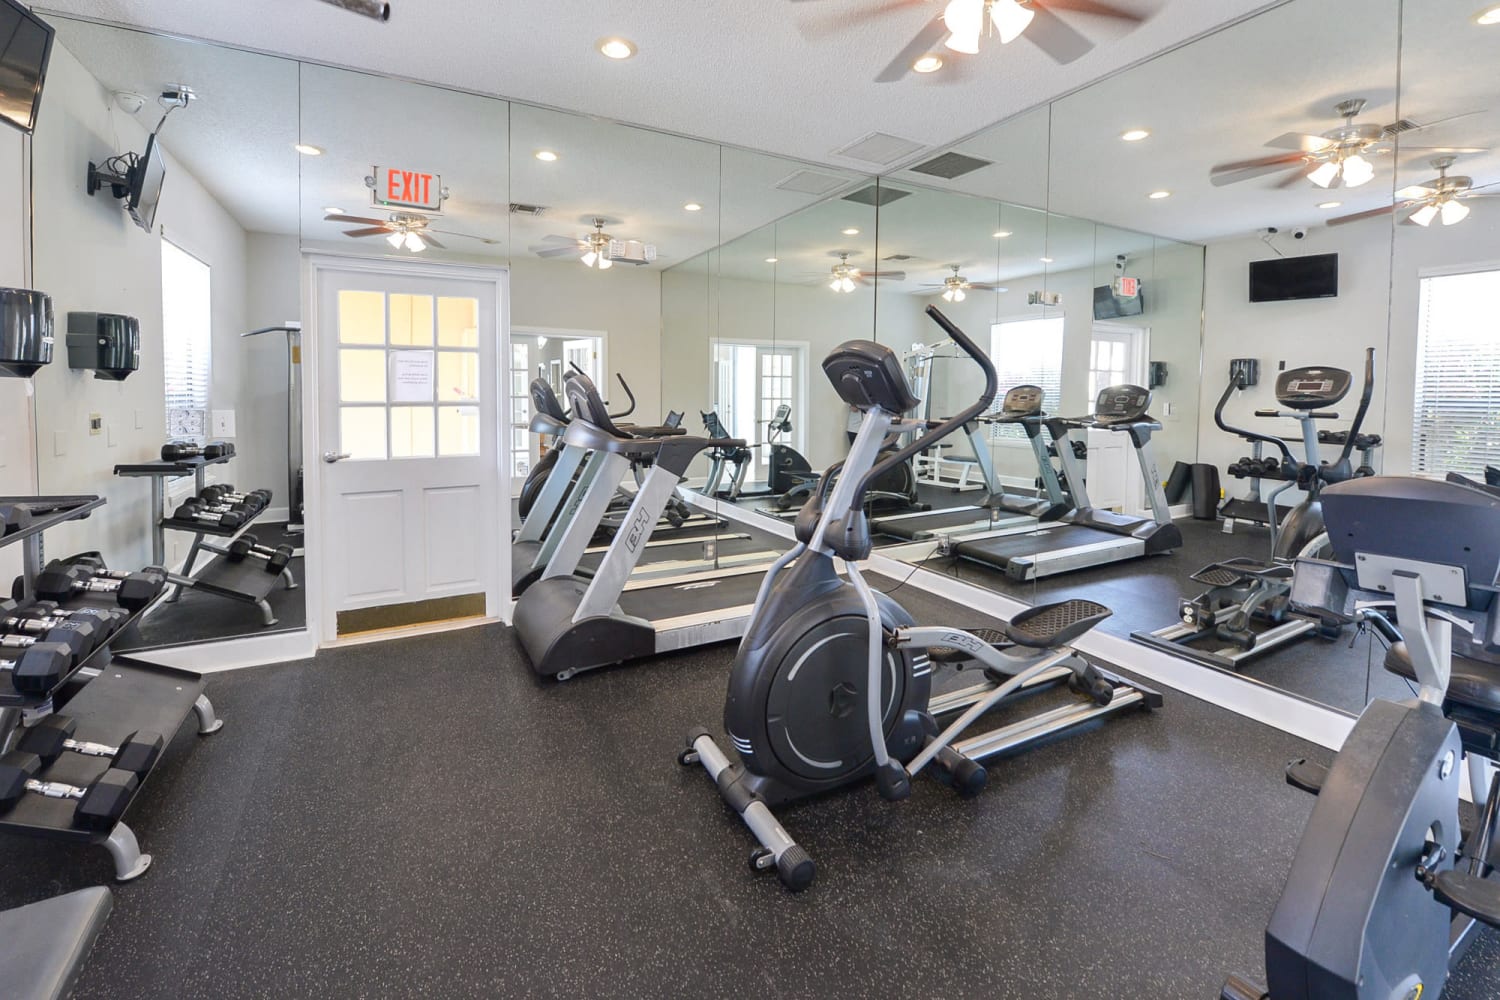 Fitness center at Savannah Place Apartments & Townhomes in Boca Raton, Florida